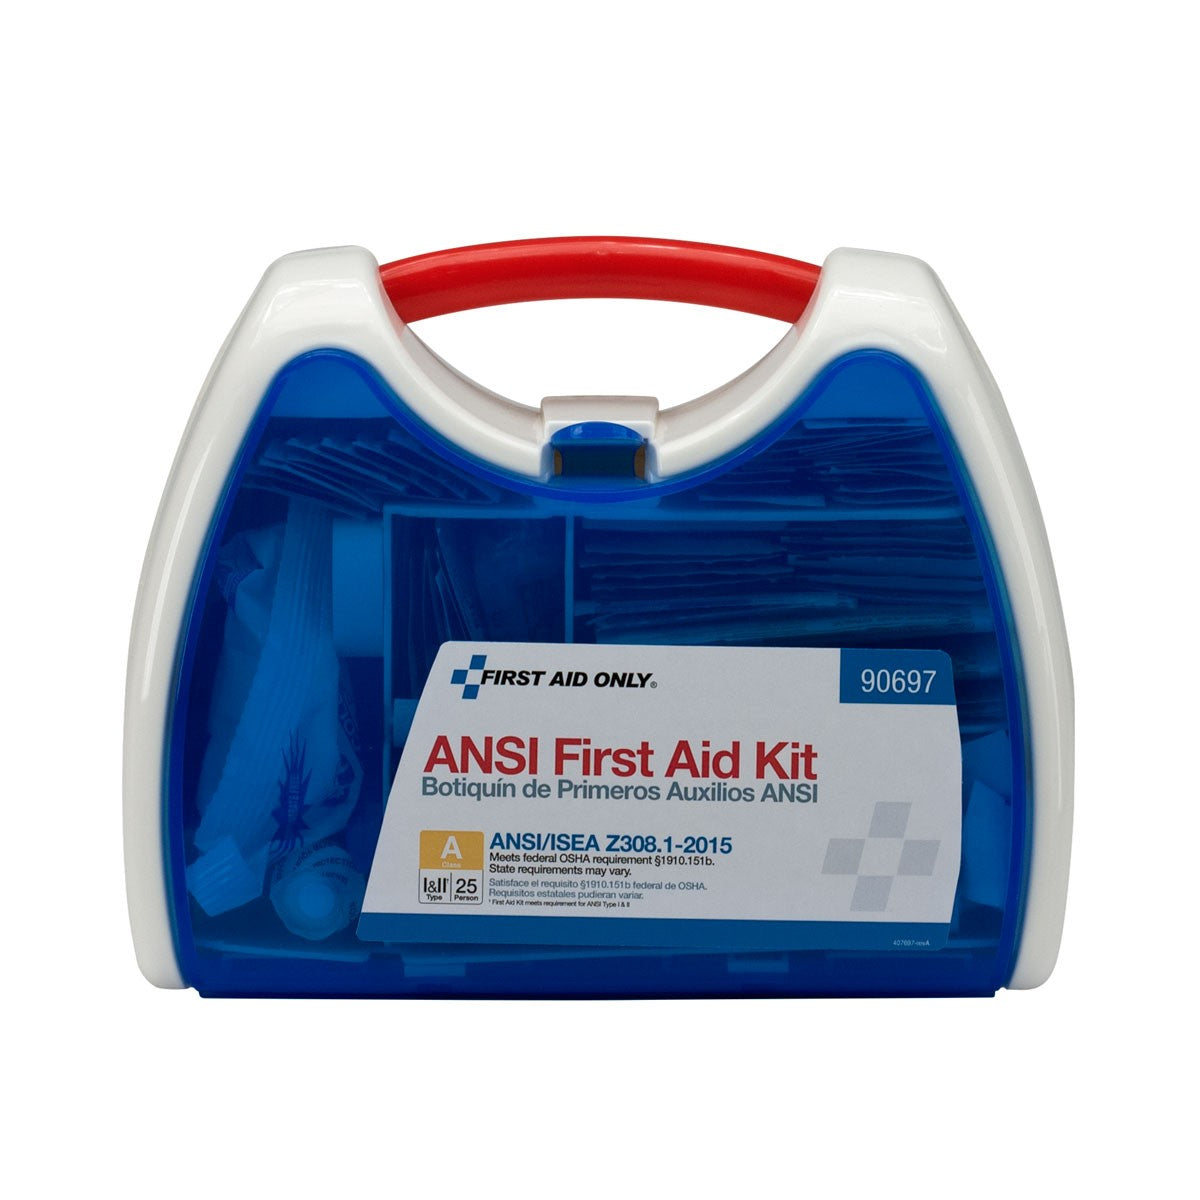 25 Person Ready Care First Aid Kit, ANSI Compliant - W-90697